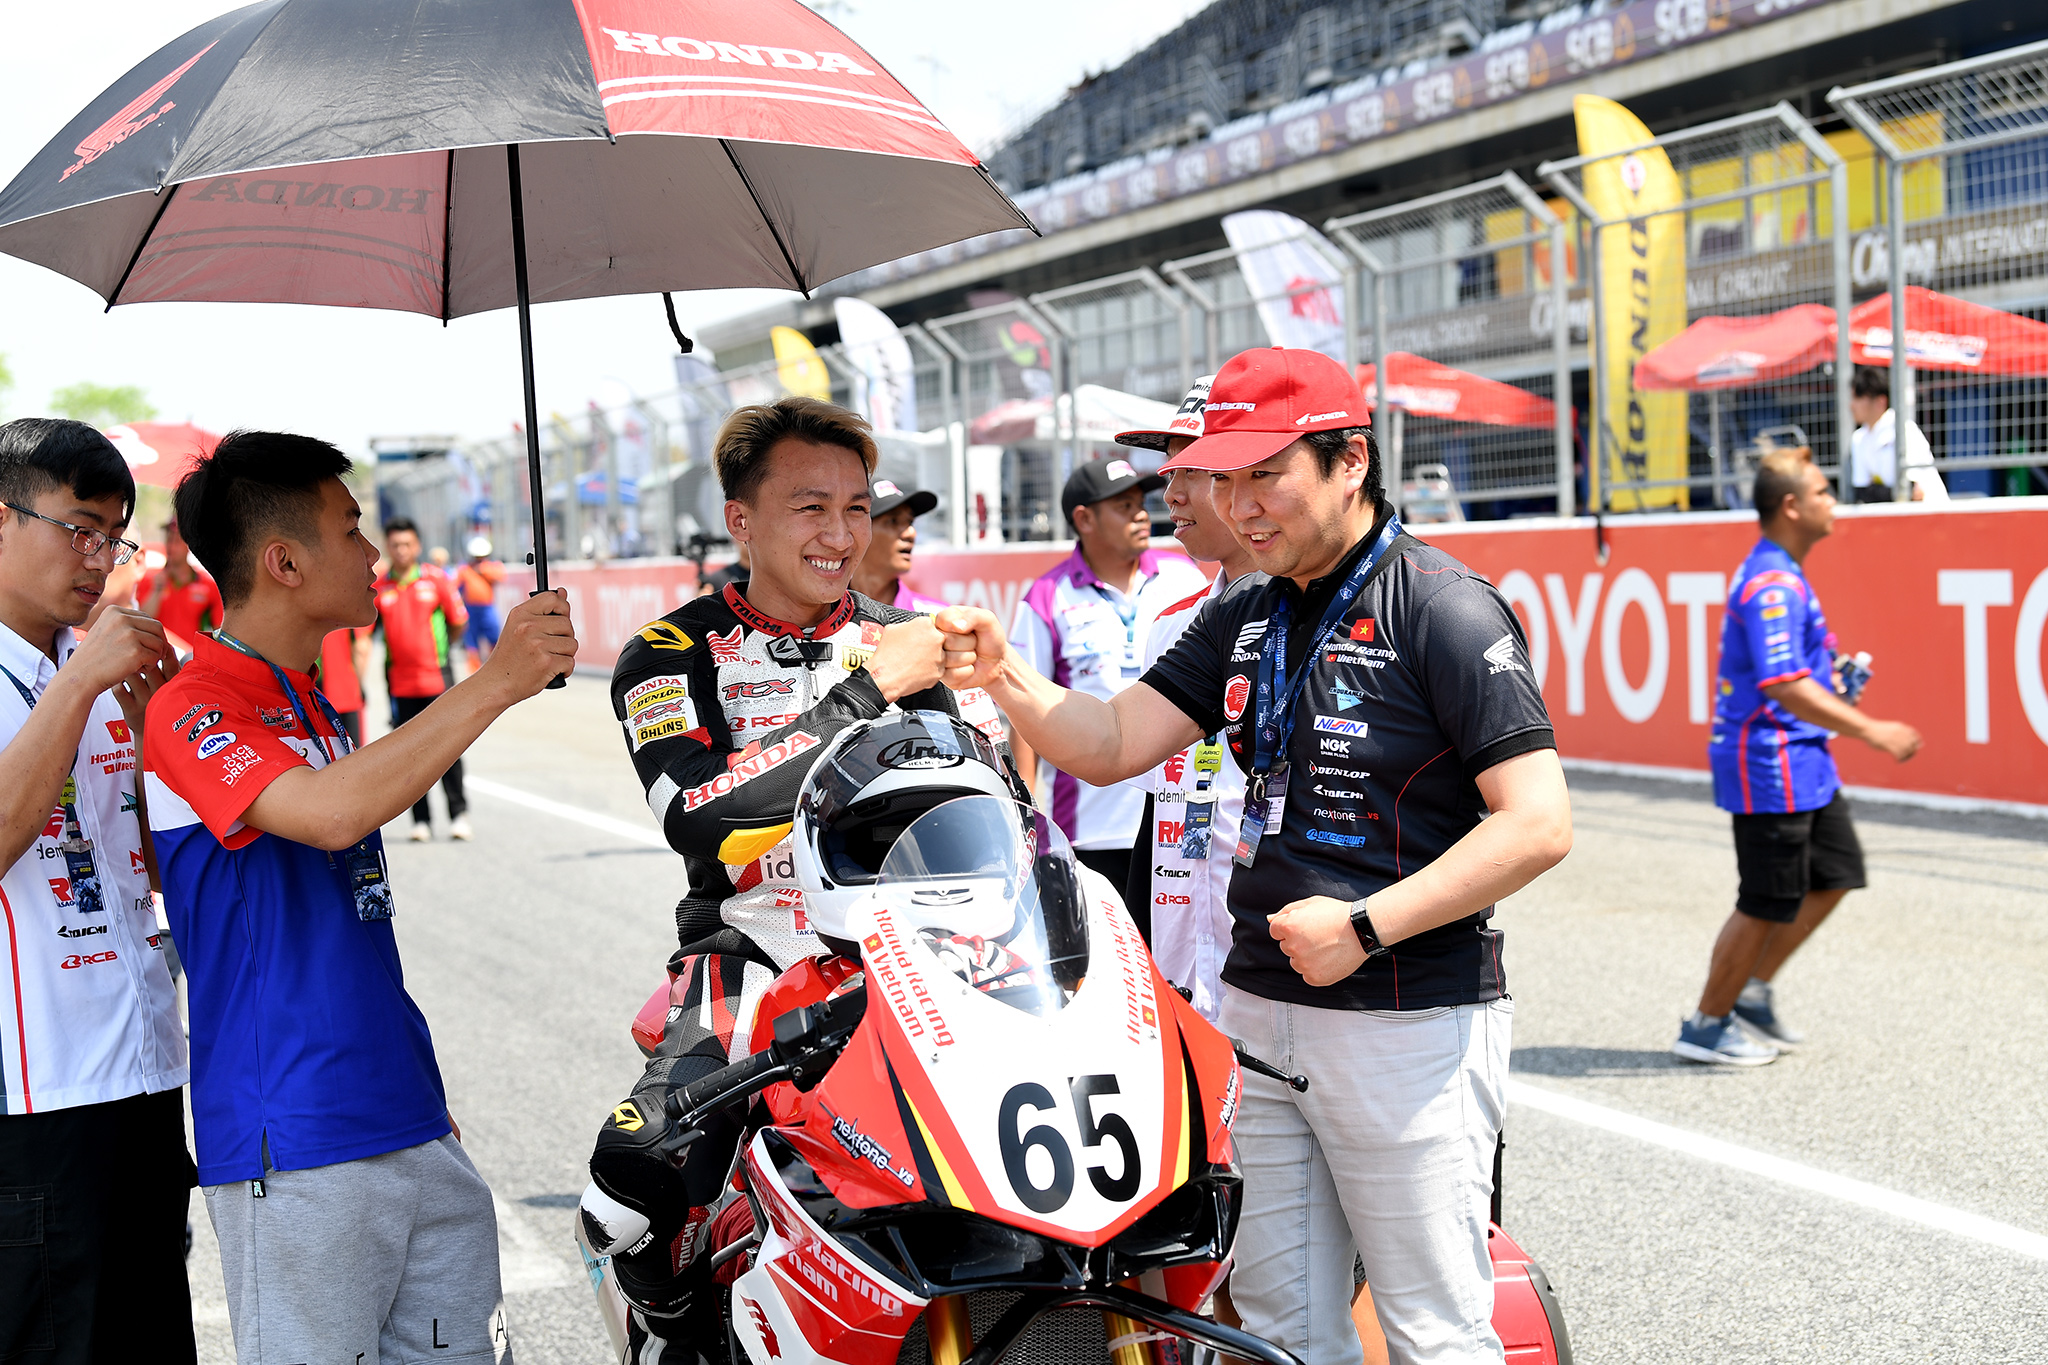 Honda Racing Vietnam ready to fight in Stage 2 ARRC 2023 Race 2 Results Stage 1 ARRC 2023 - Cao Viet Nam achieved the highest ranking in his career arrc-2023-round1-race1-022.jpg